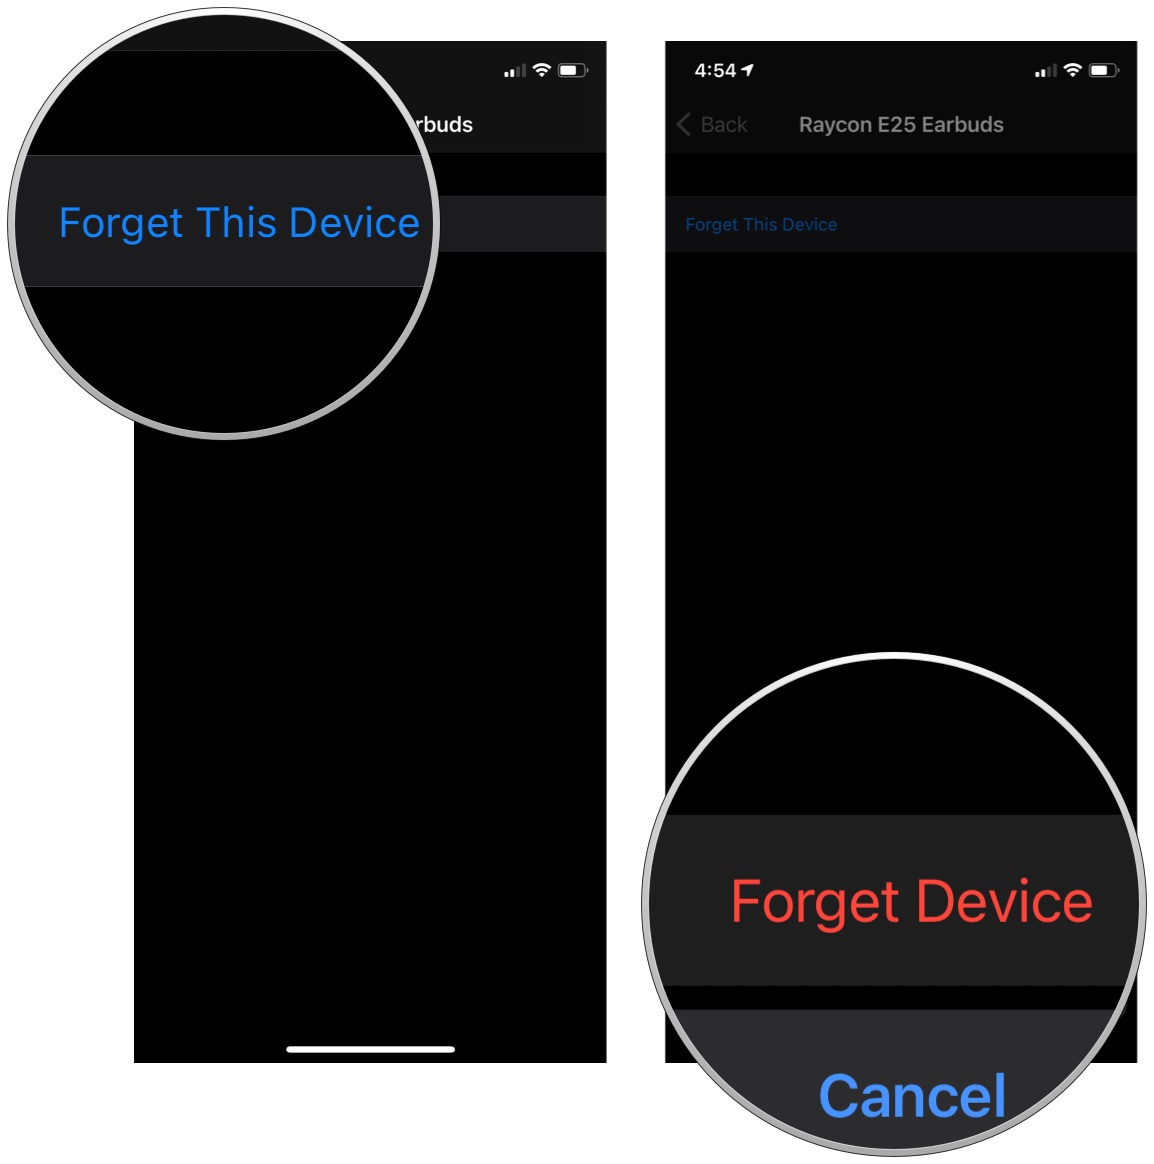 Forget a Bluetooth device, showing how to tap Forget This Device, then tap Forget Device